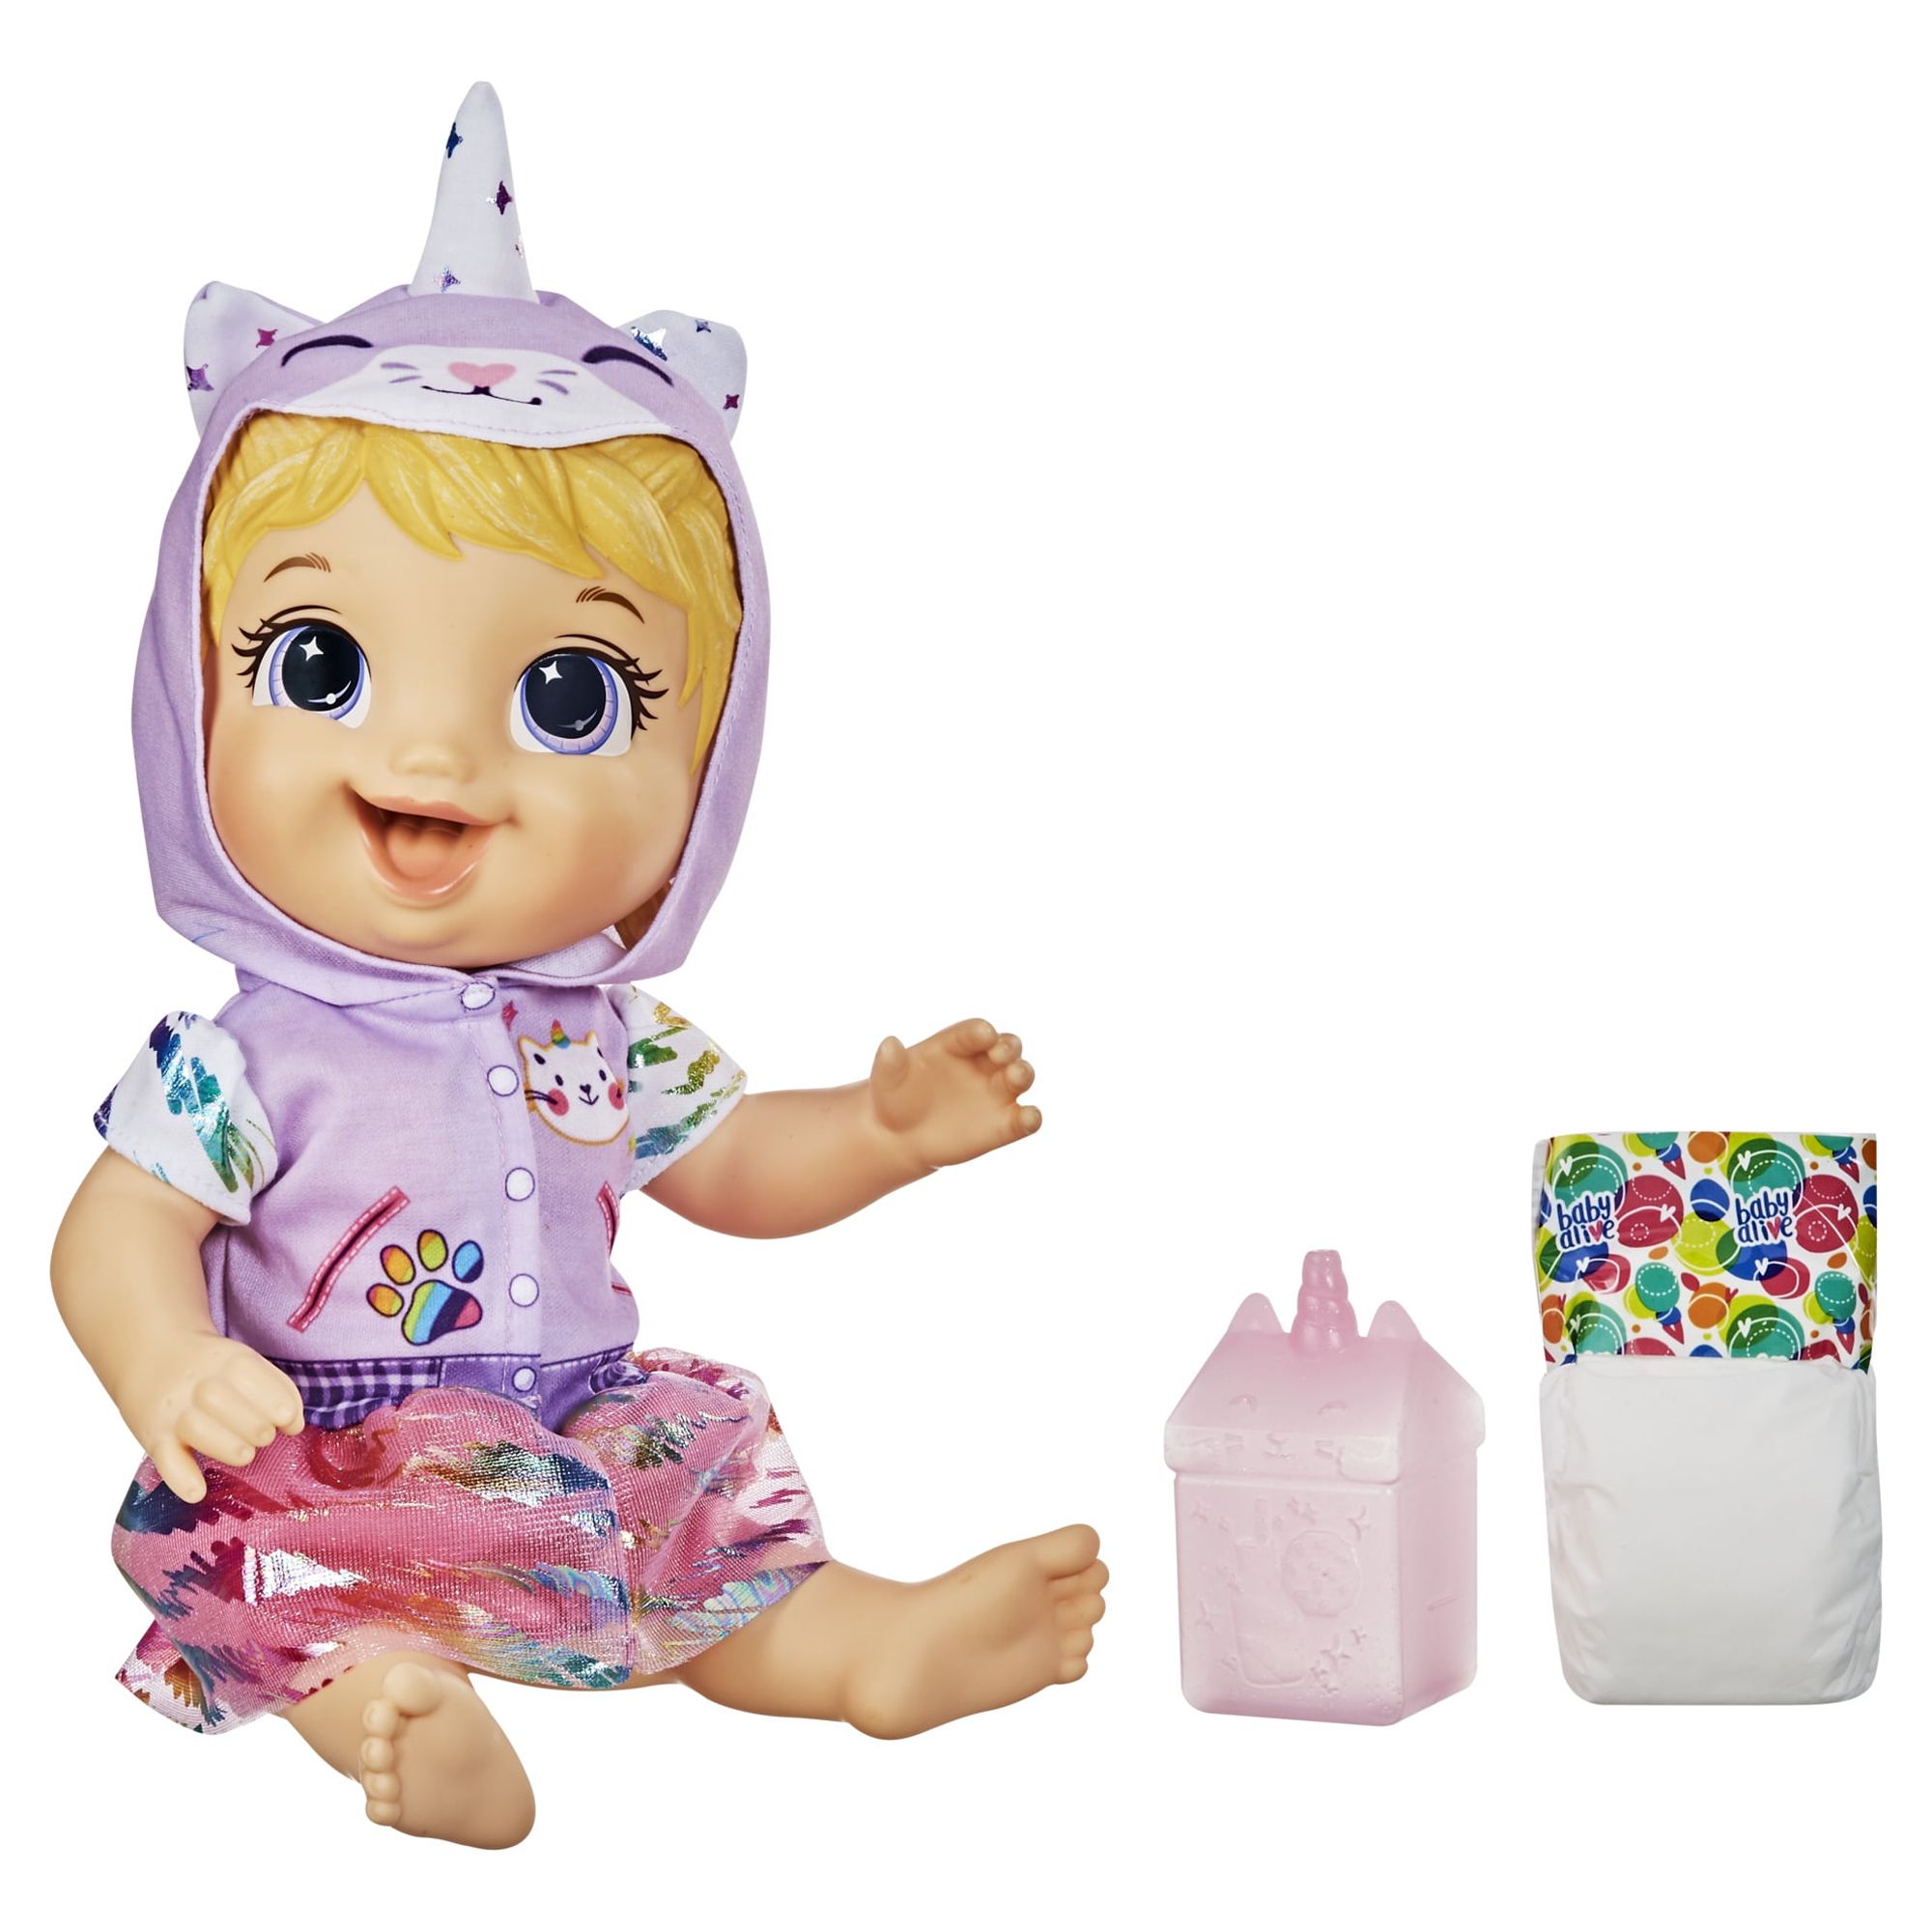 Baby Alive Tinycorns Doll, Panda Unicorn, Accessories, Drinks, Wets, Blonde Hair Toy Doll Playset, 4 Pieces Included - image 1 of 5